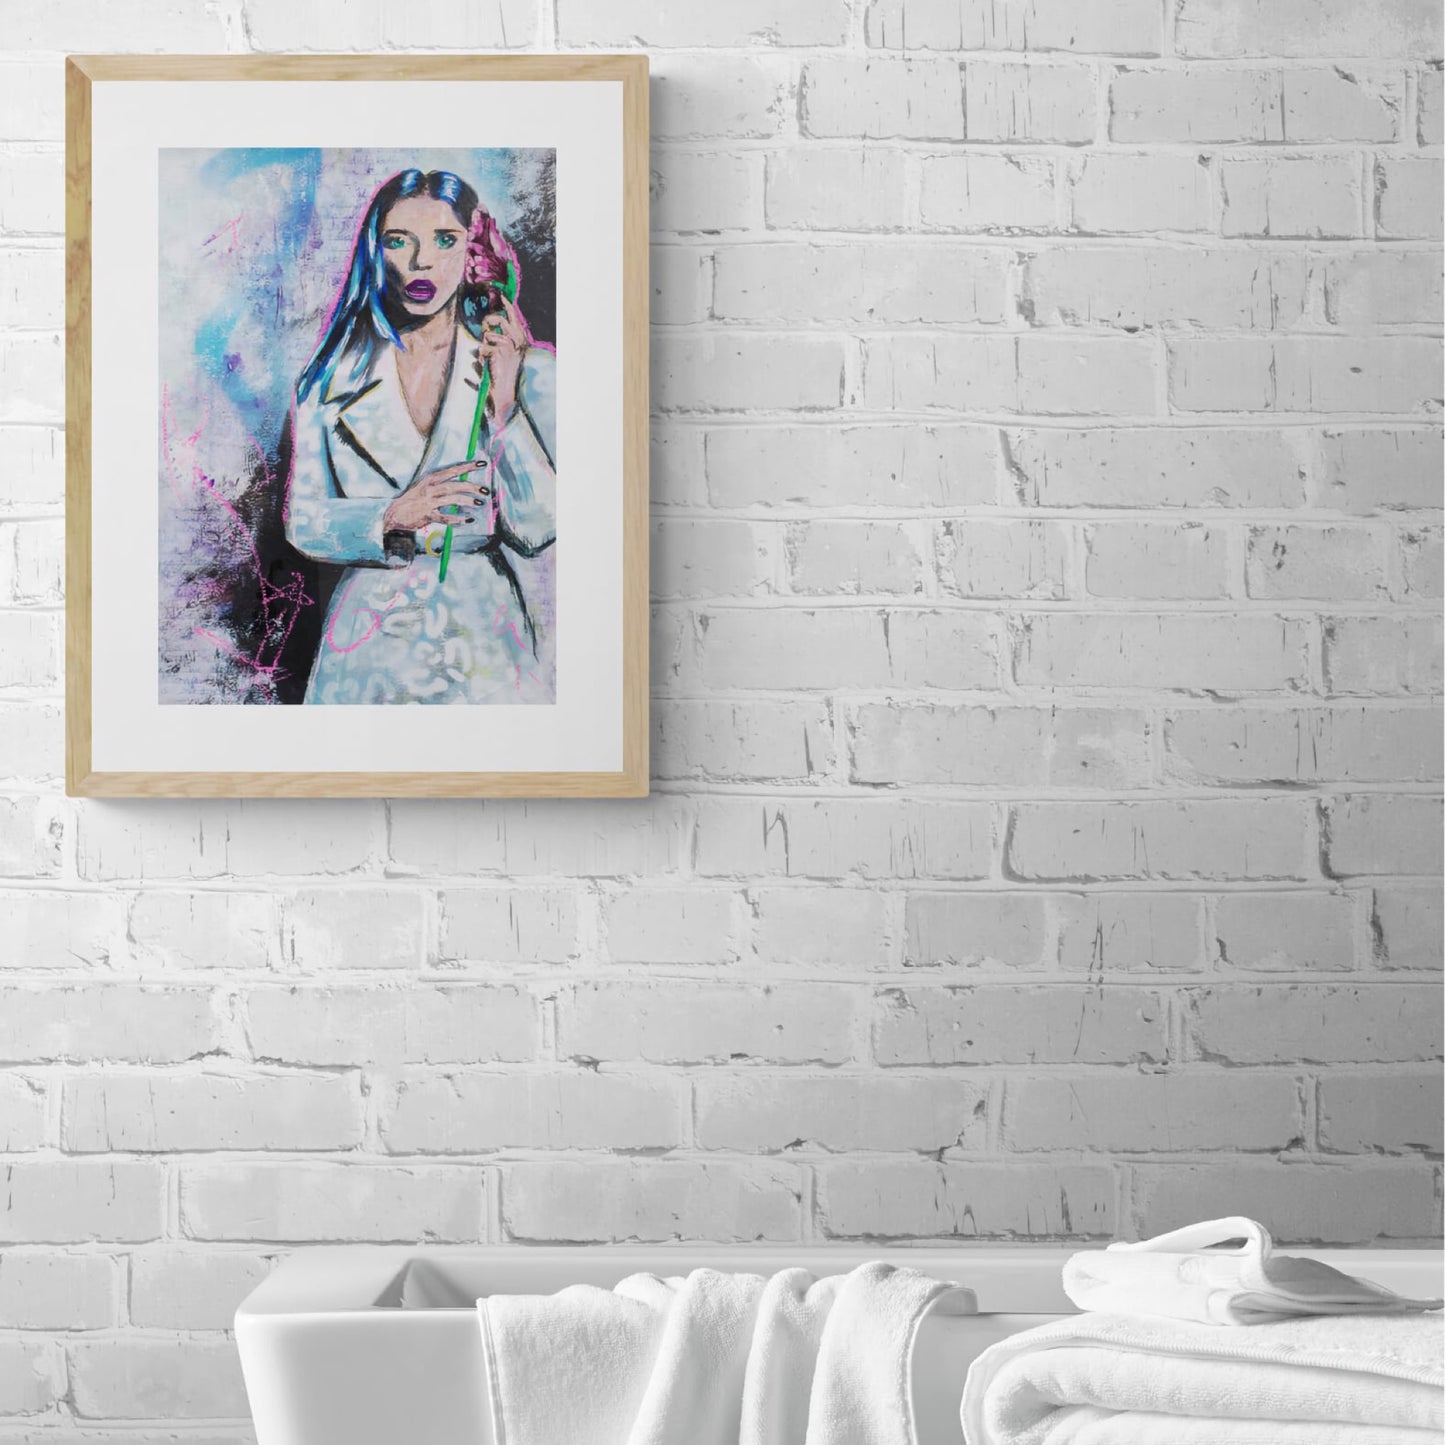 artwork for sale, angela sarafyan fan art, art wall painting of woman with flower